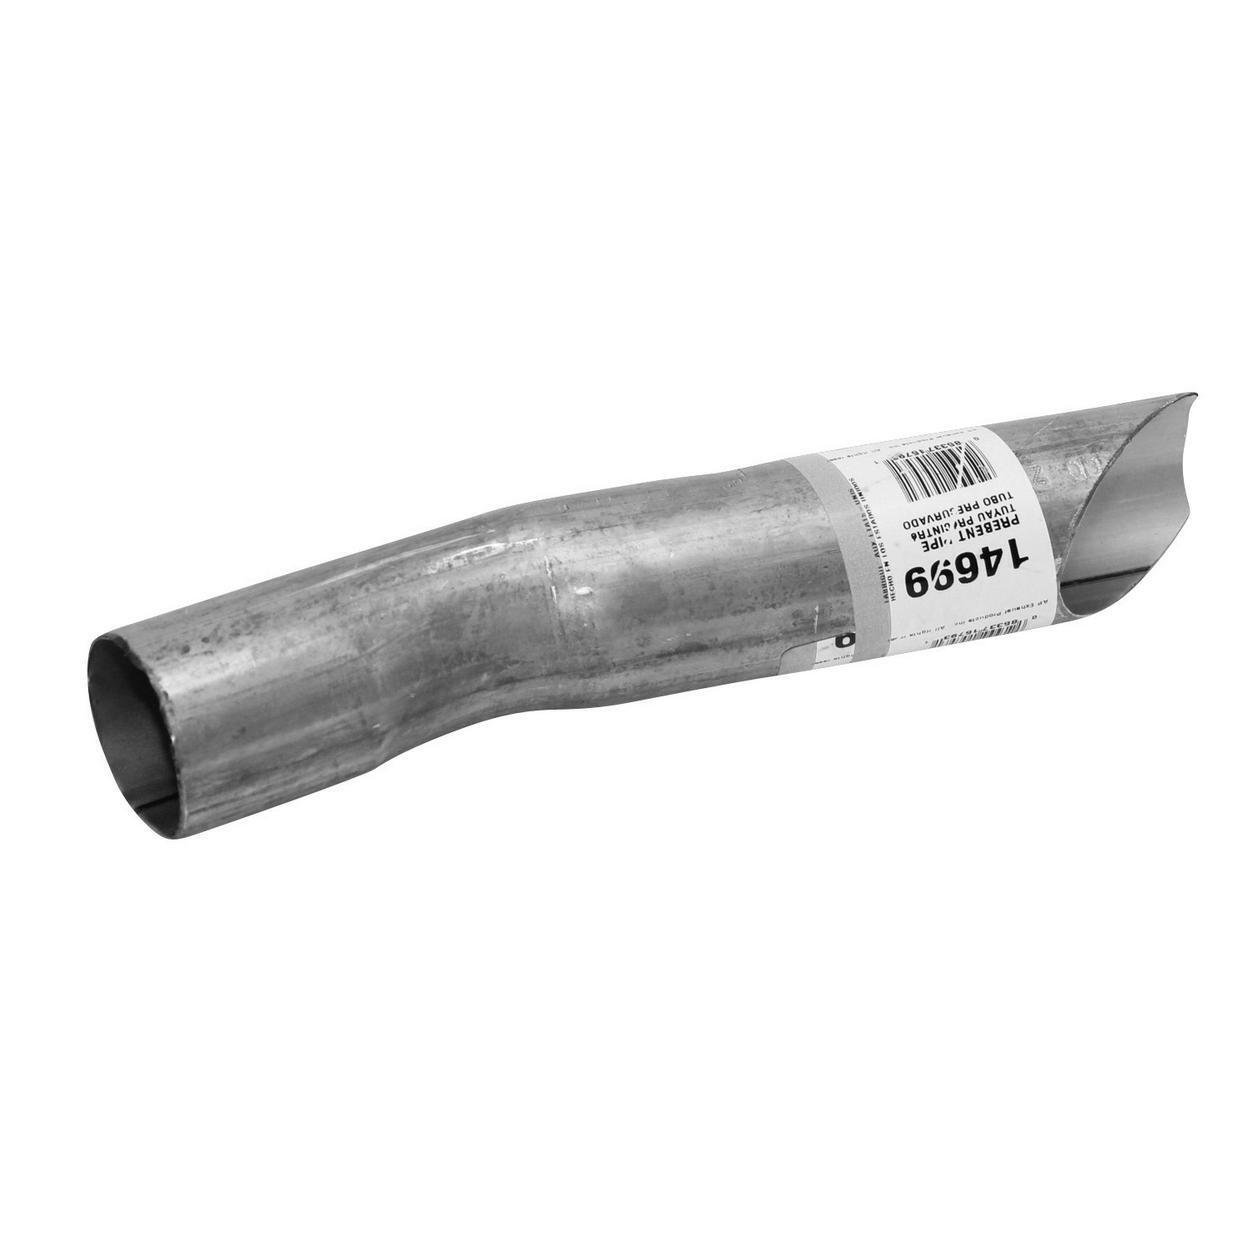 14699-BJ Exhaust Tail Pipe Fits 1993-1995 Chevrolet Beretta 2.2L L4 GAS OHV